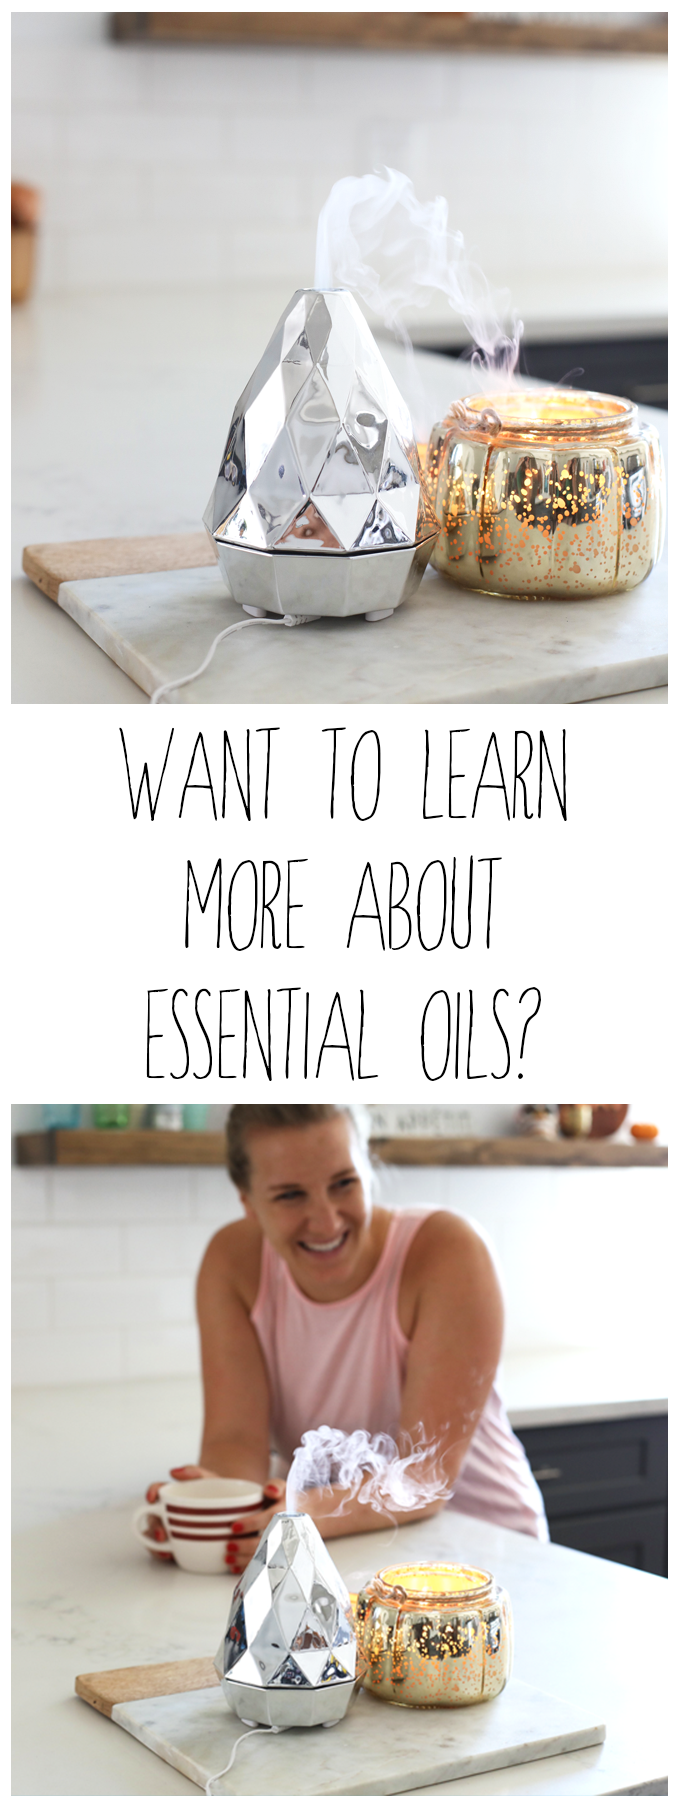 Learn more about essential oils - which ones are best, how to use them and more!